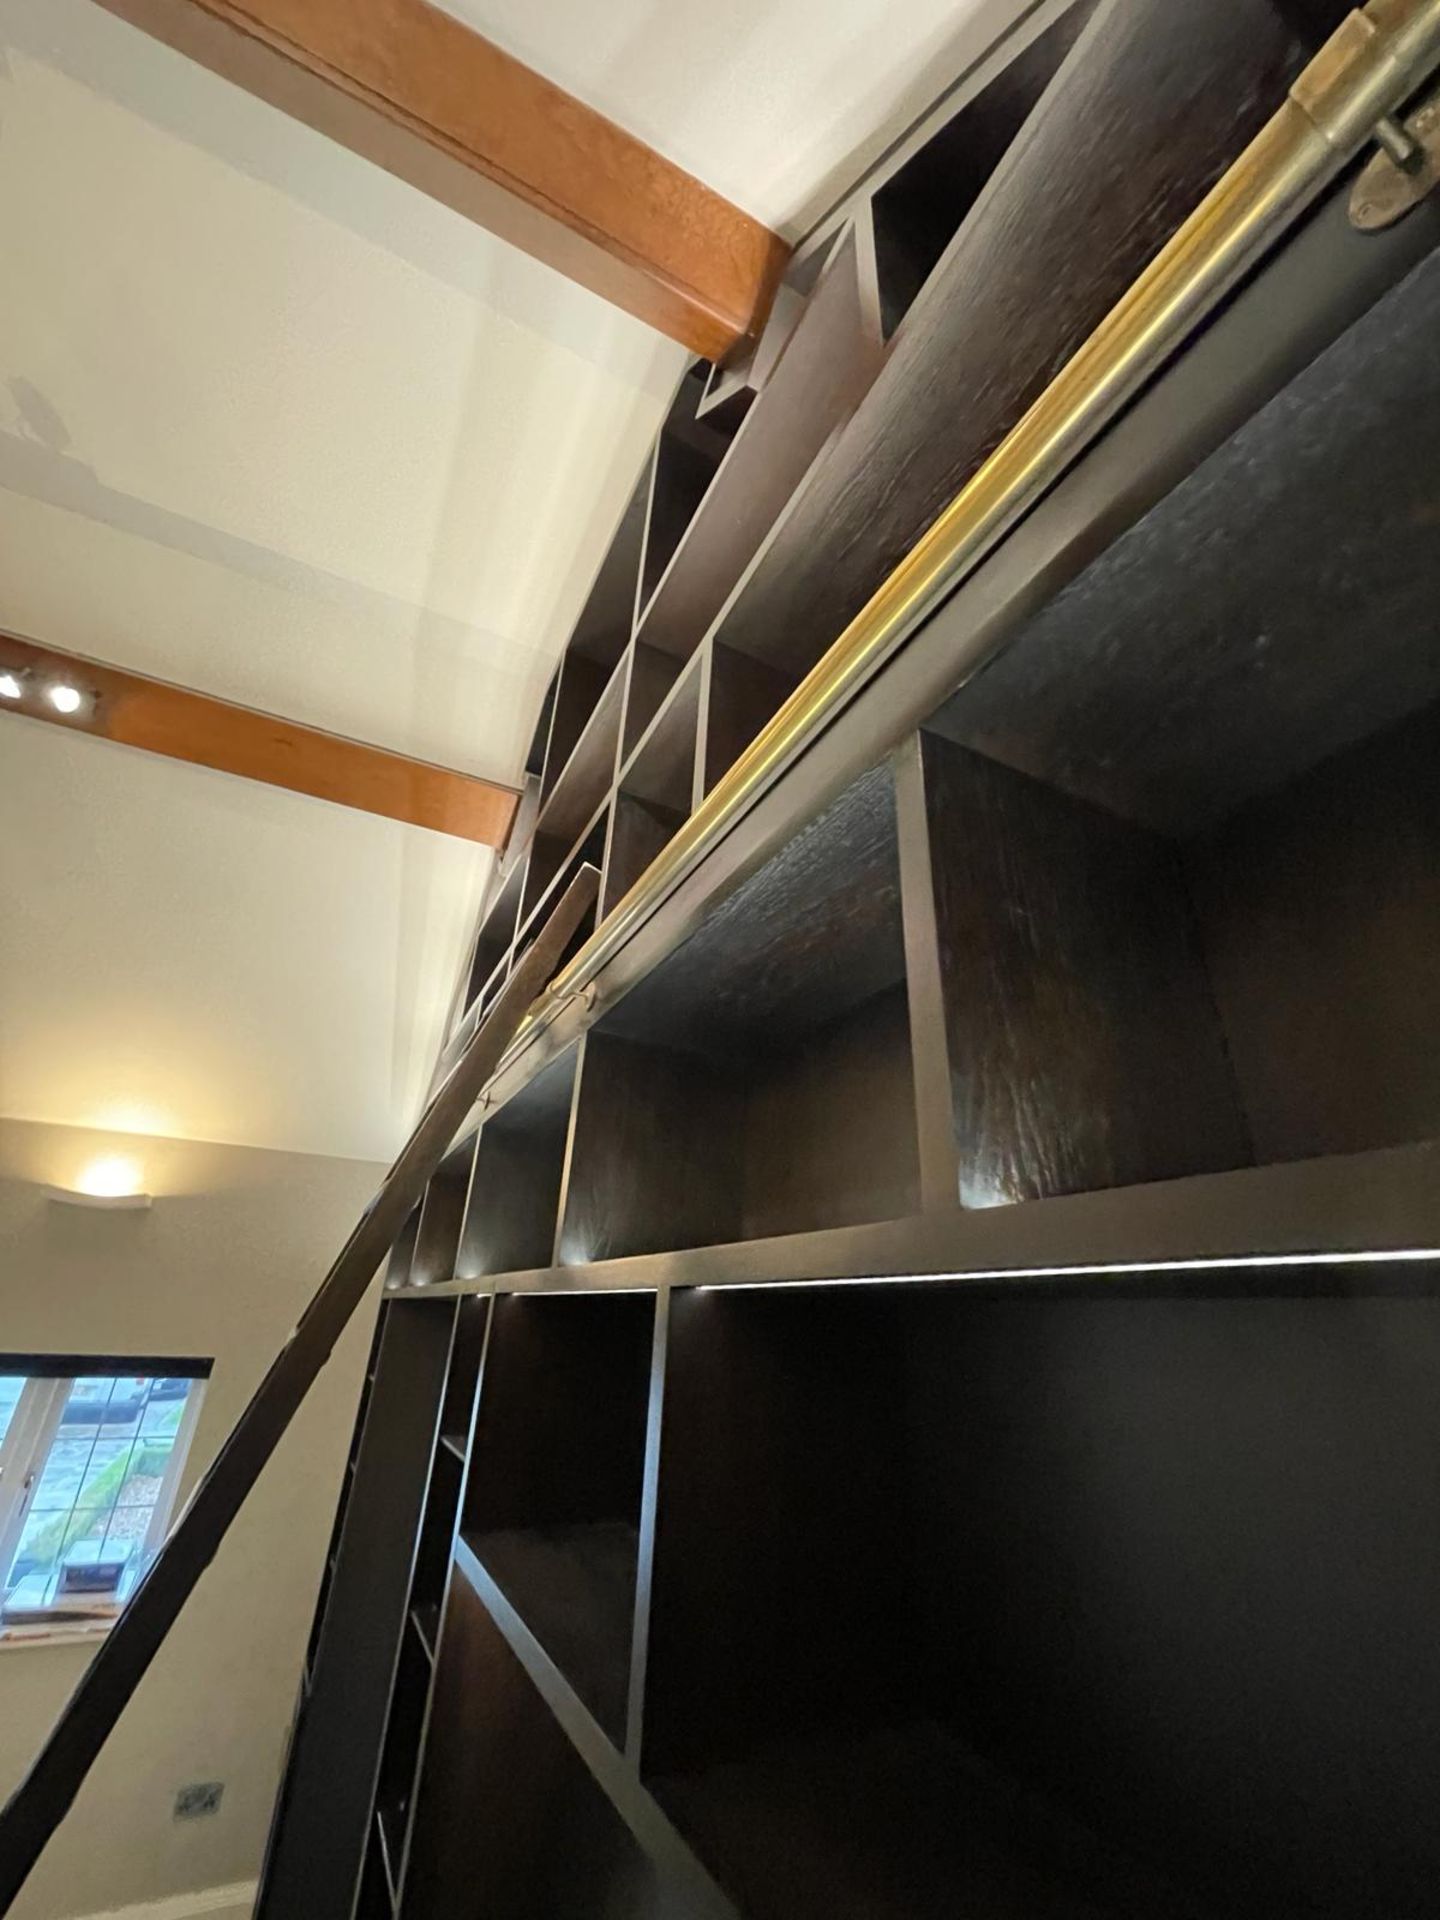 1 x Bespoke 4.7-Metre Wide Fitted Luxury Home Library Solid Wood Bookcase Wall Storage - Image 7 of 23